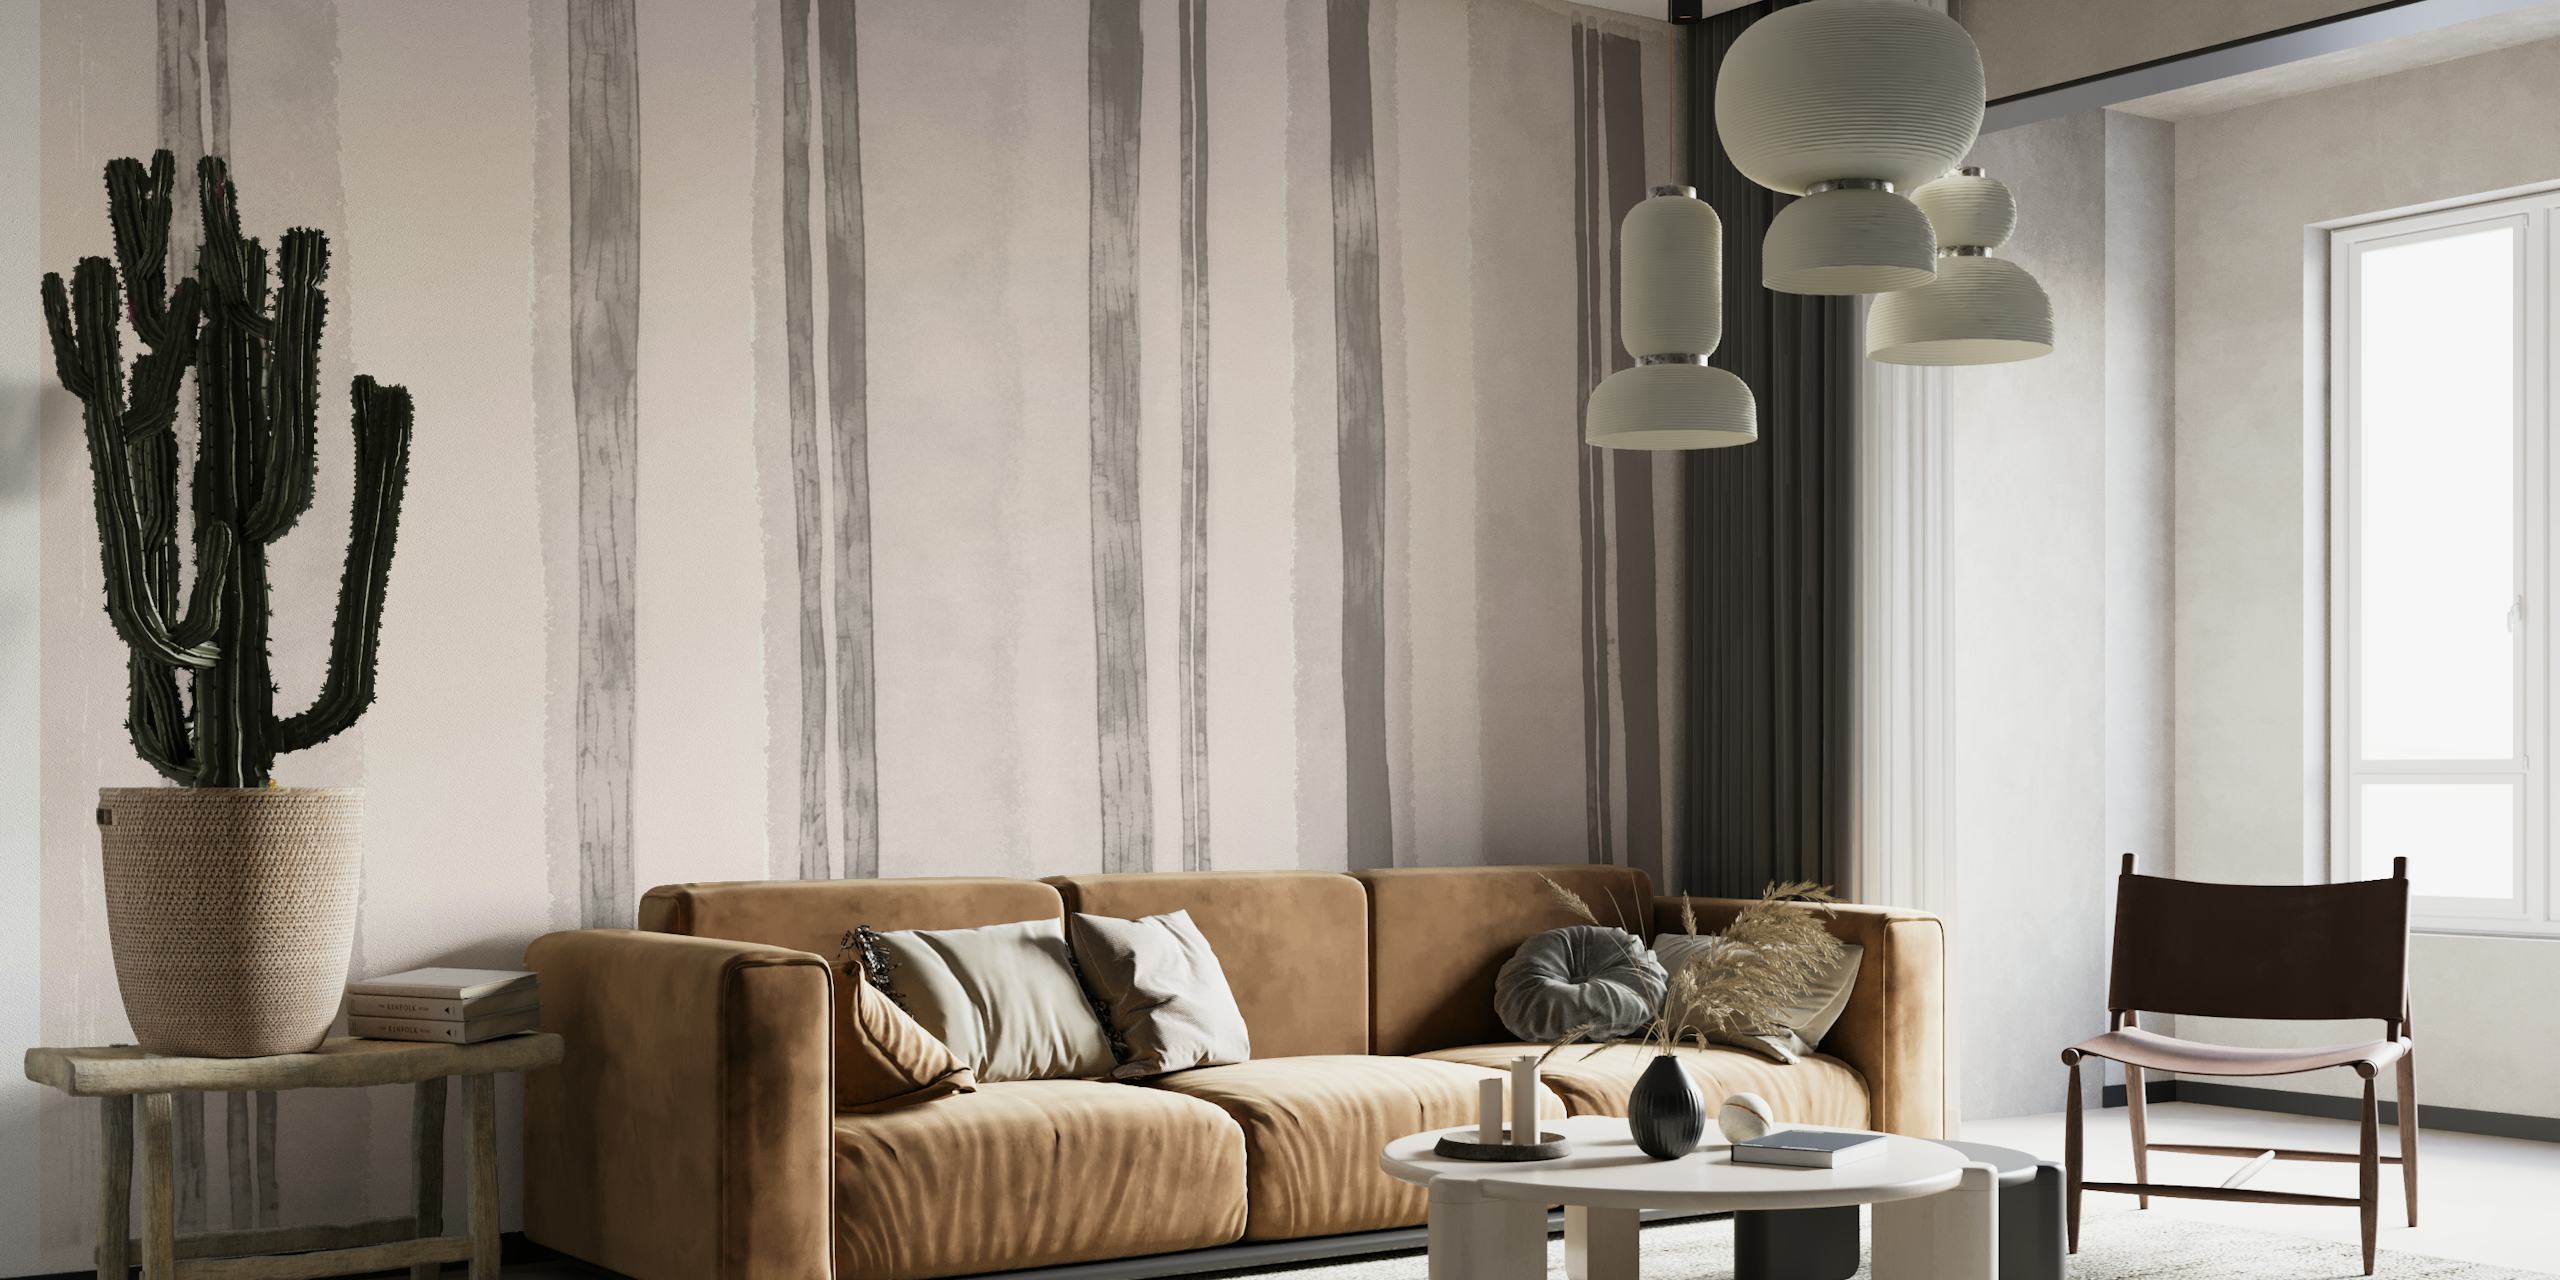 Neutral watercolor stripes wall mural in shades of gray and beige